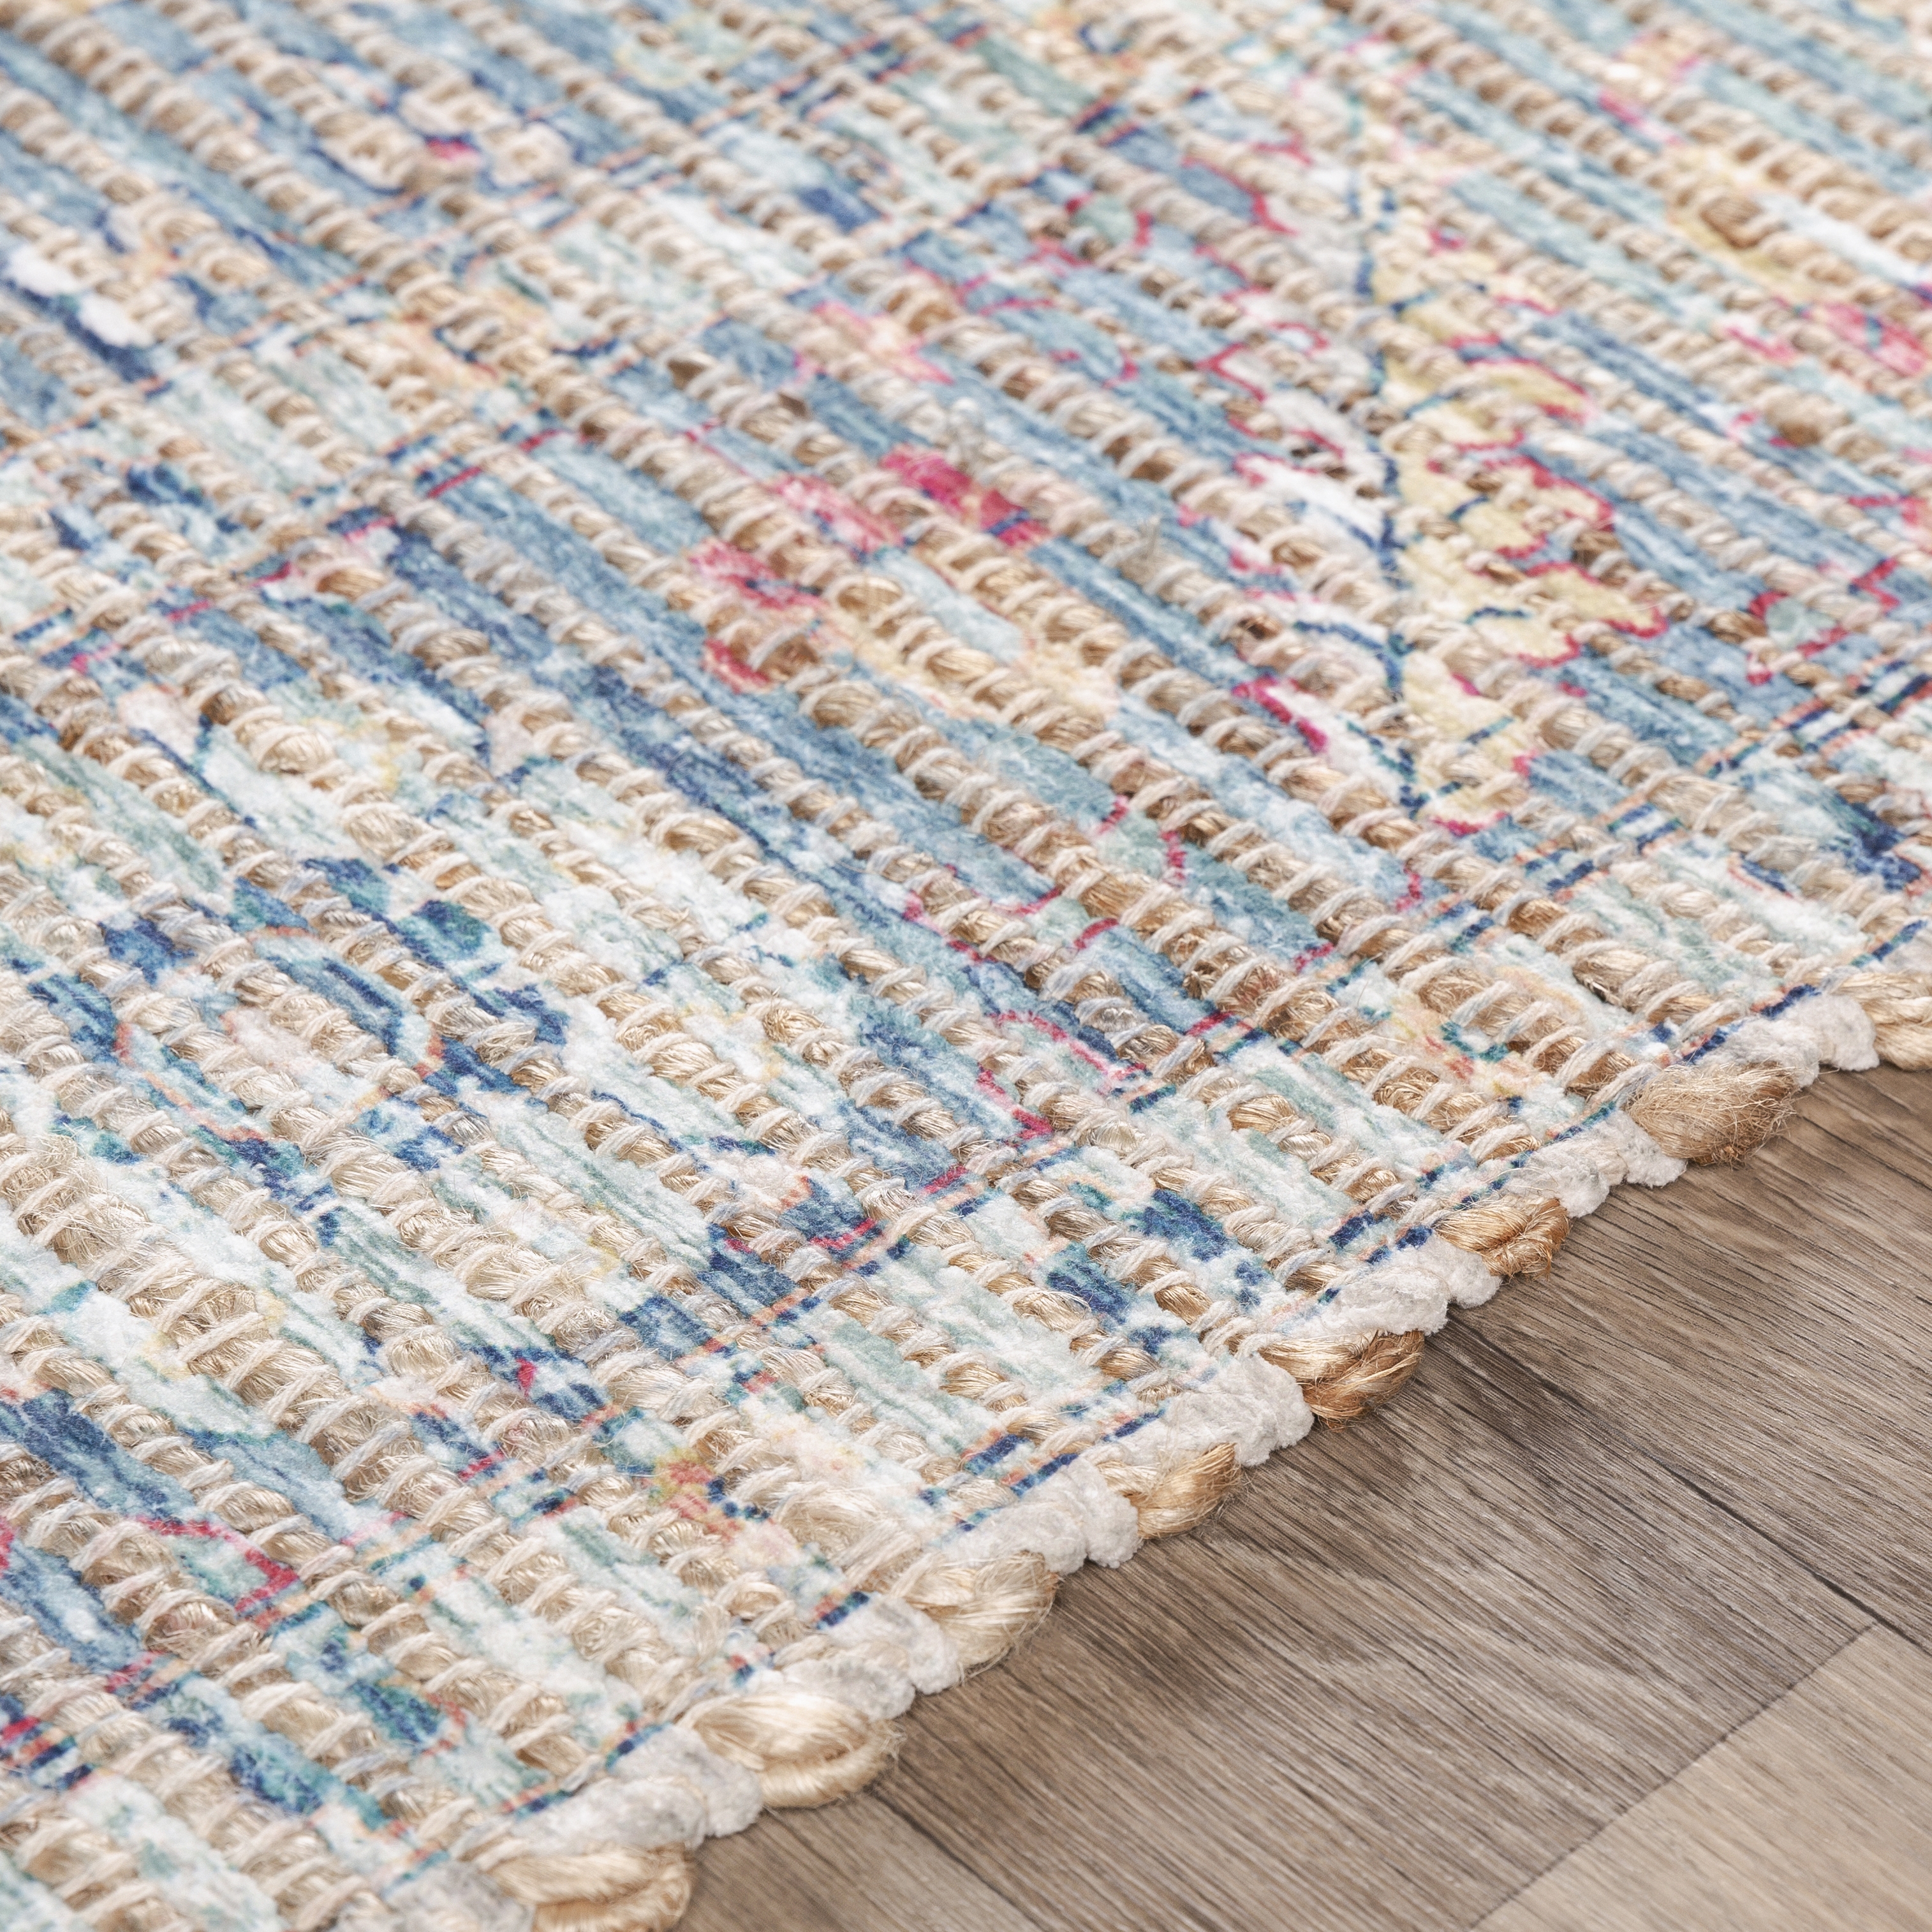 Coventry Rug, 2' x 3' - Image 3